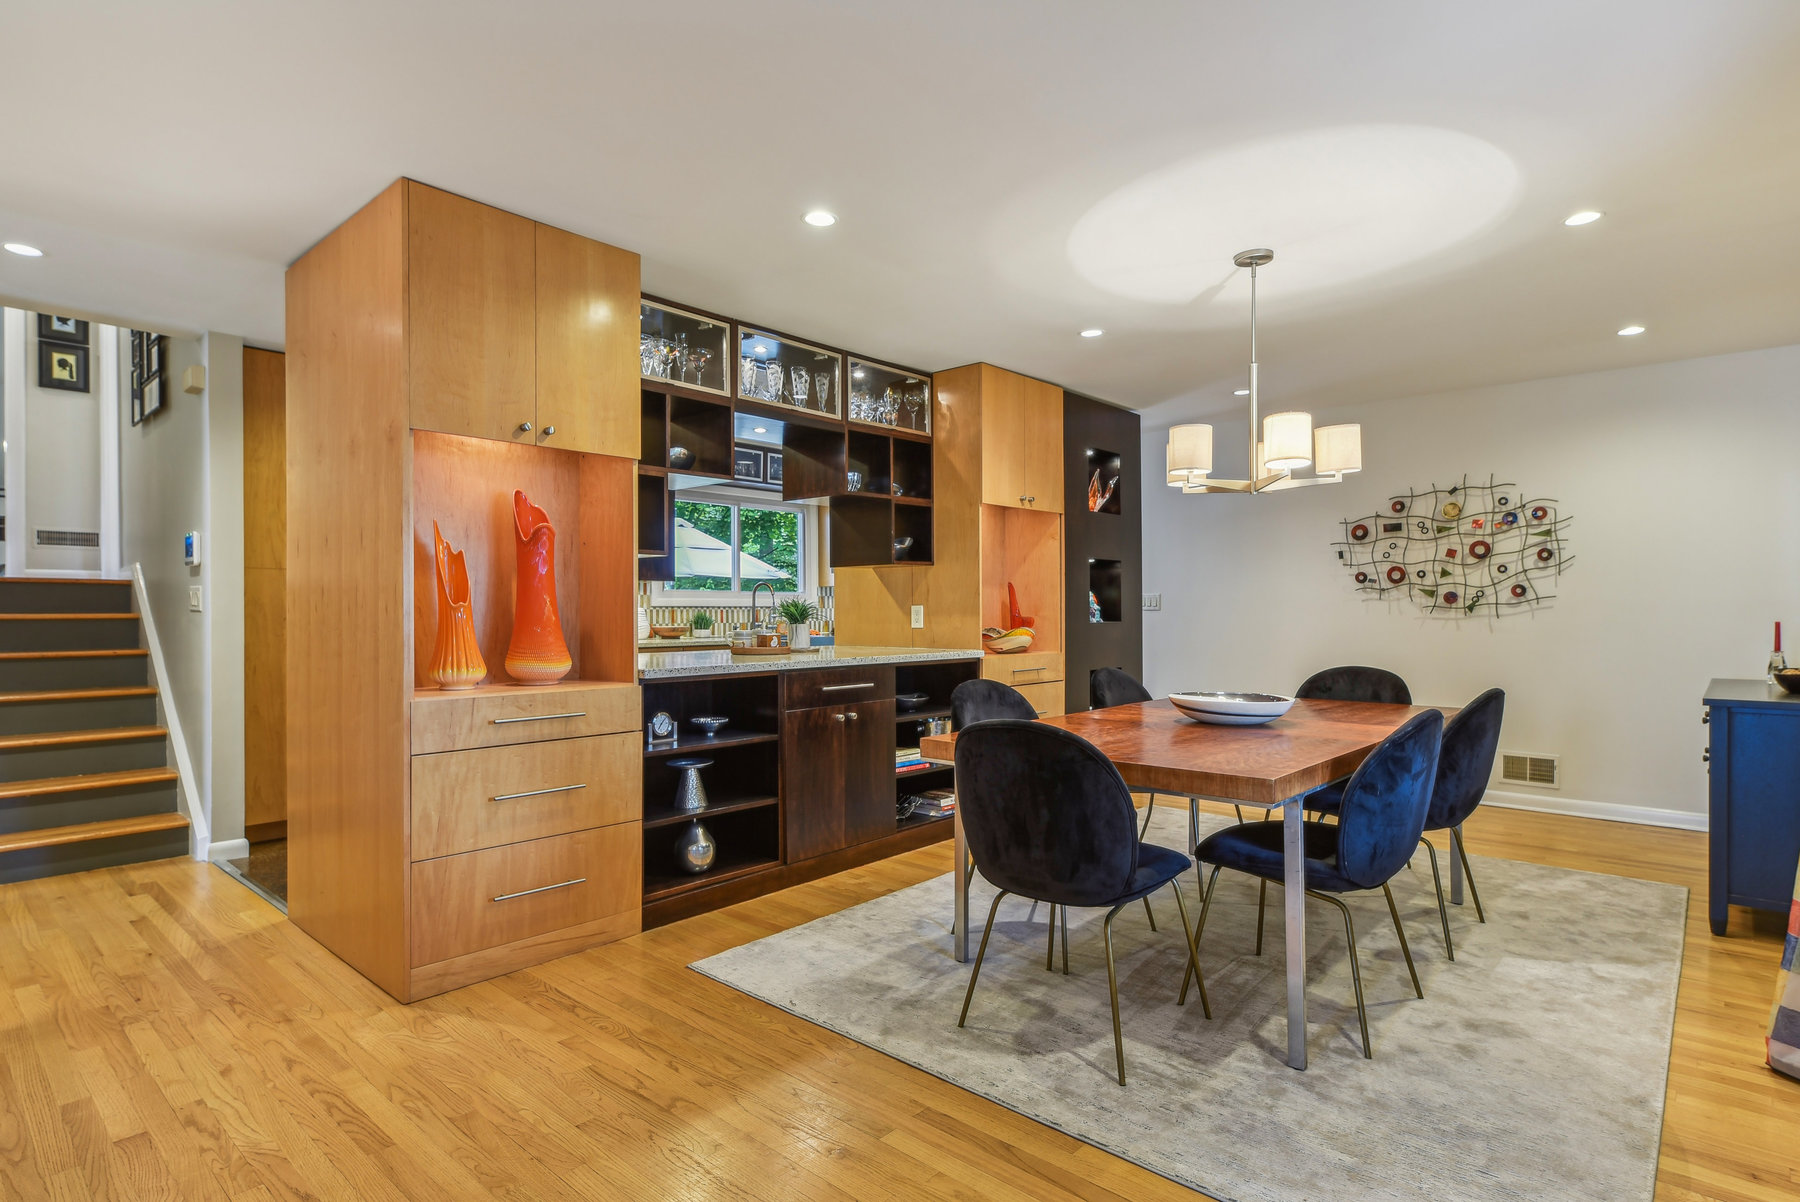 36 Winding Way, Short Hills - Dining Room to kitchen